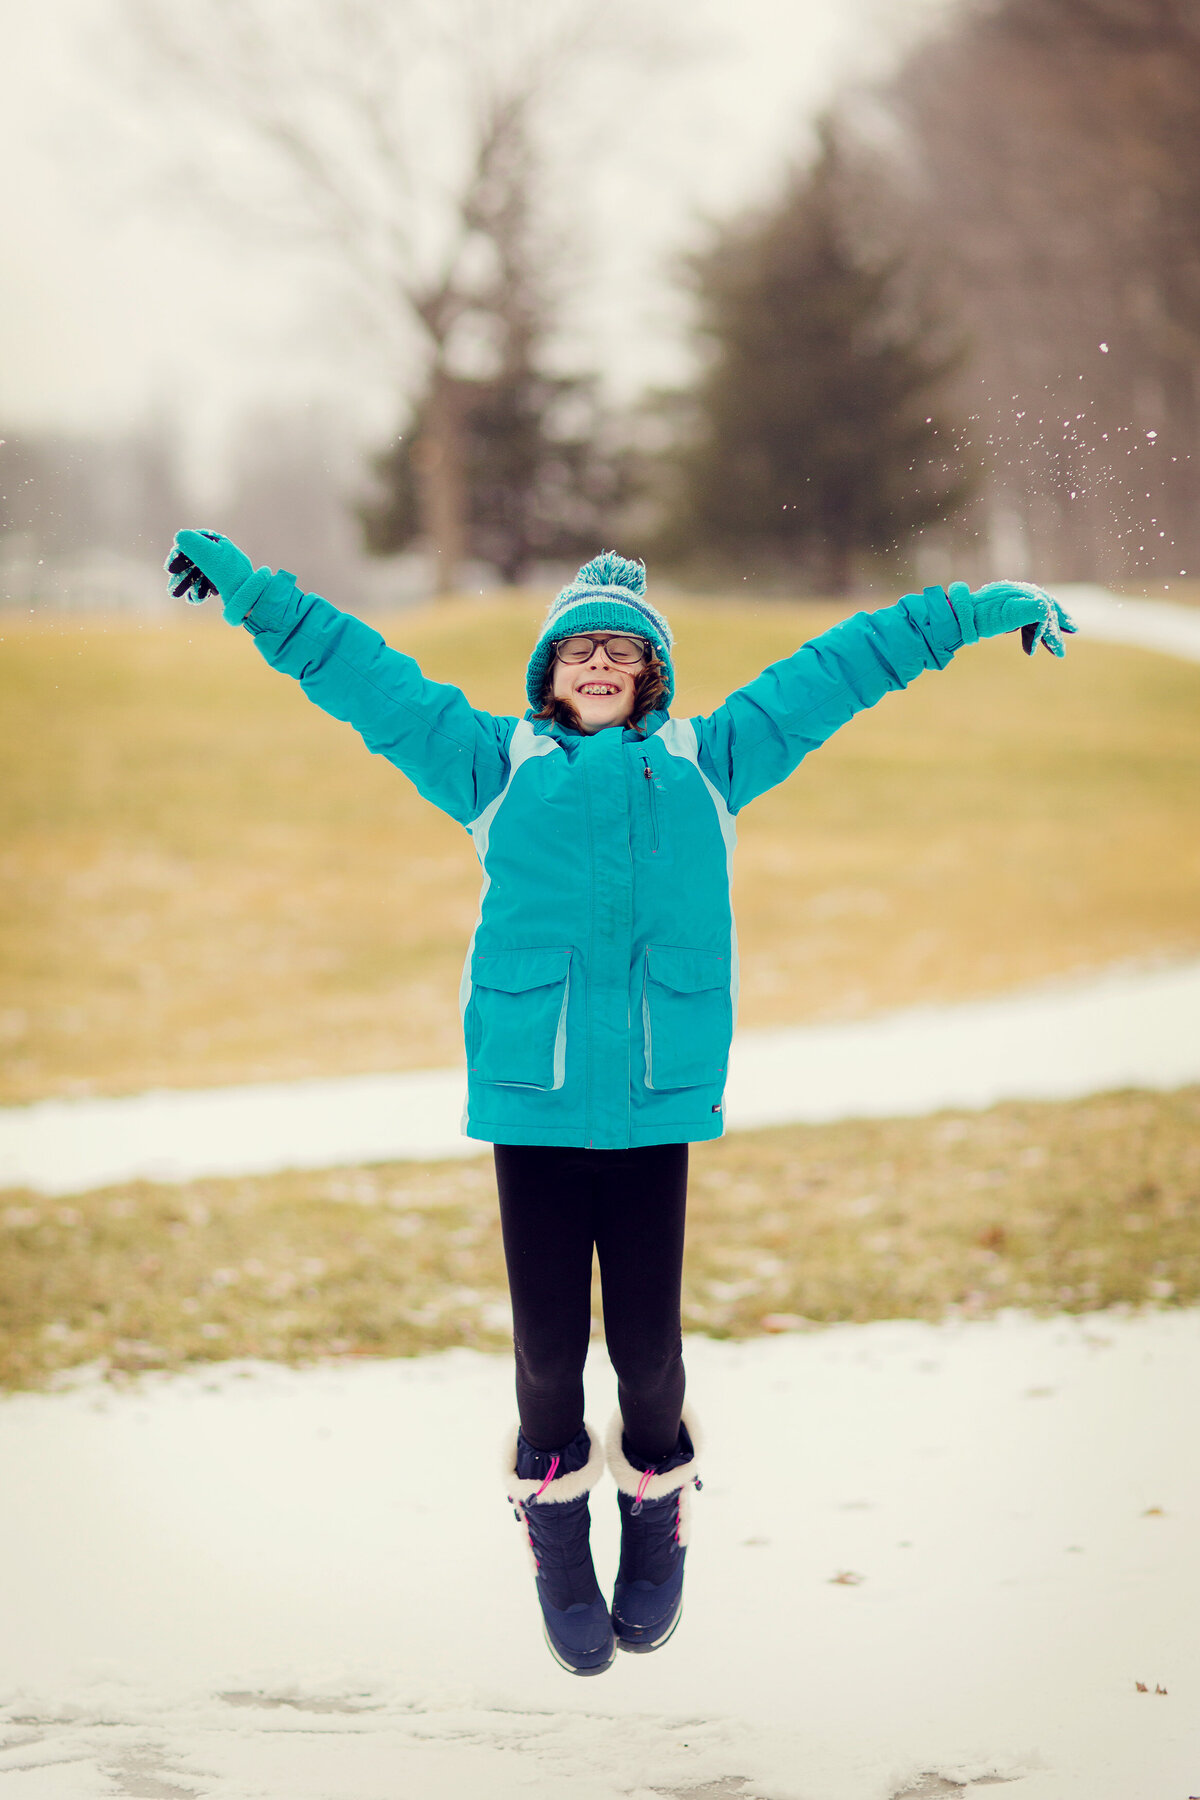 Girl is bundled up in blue coat and winter boots, jumping in the snow.